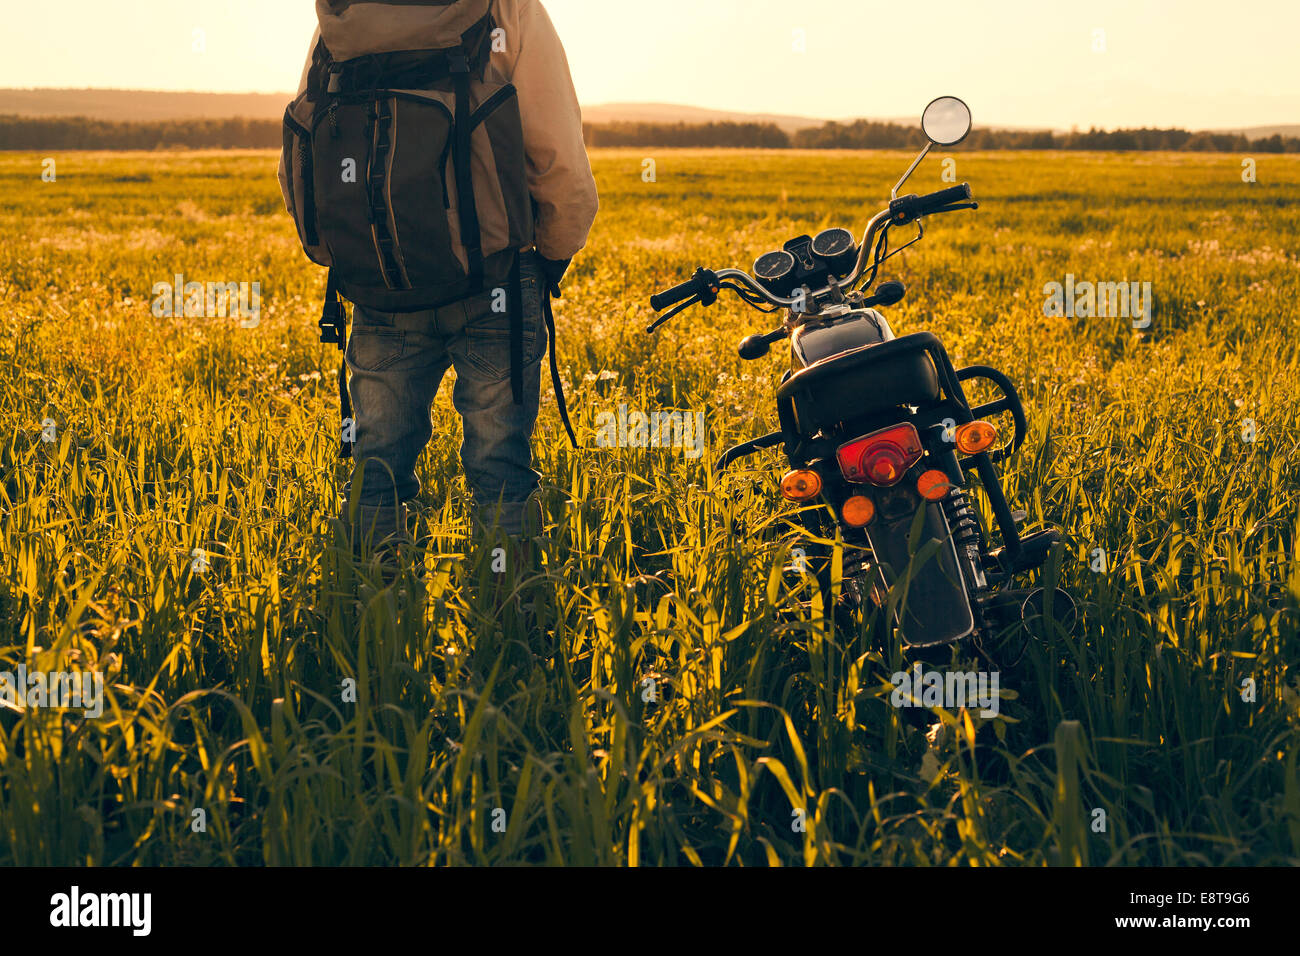 Mari man standing in field with motorcycle Banque D'Images